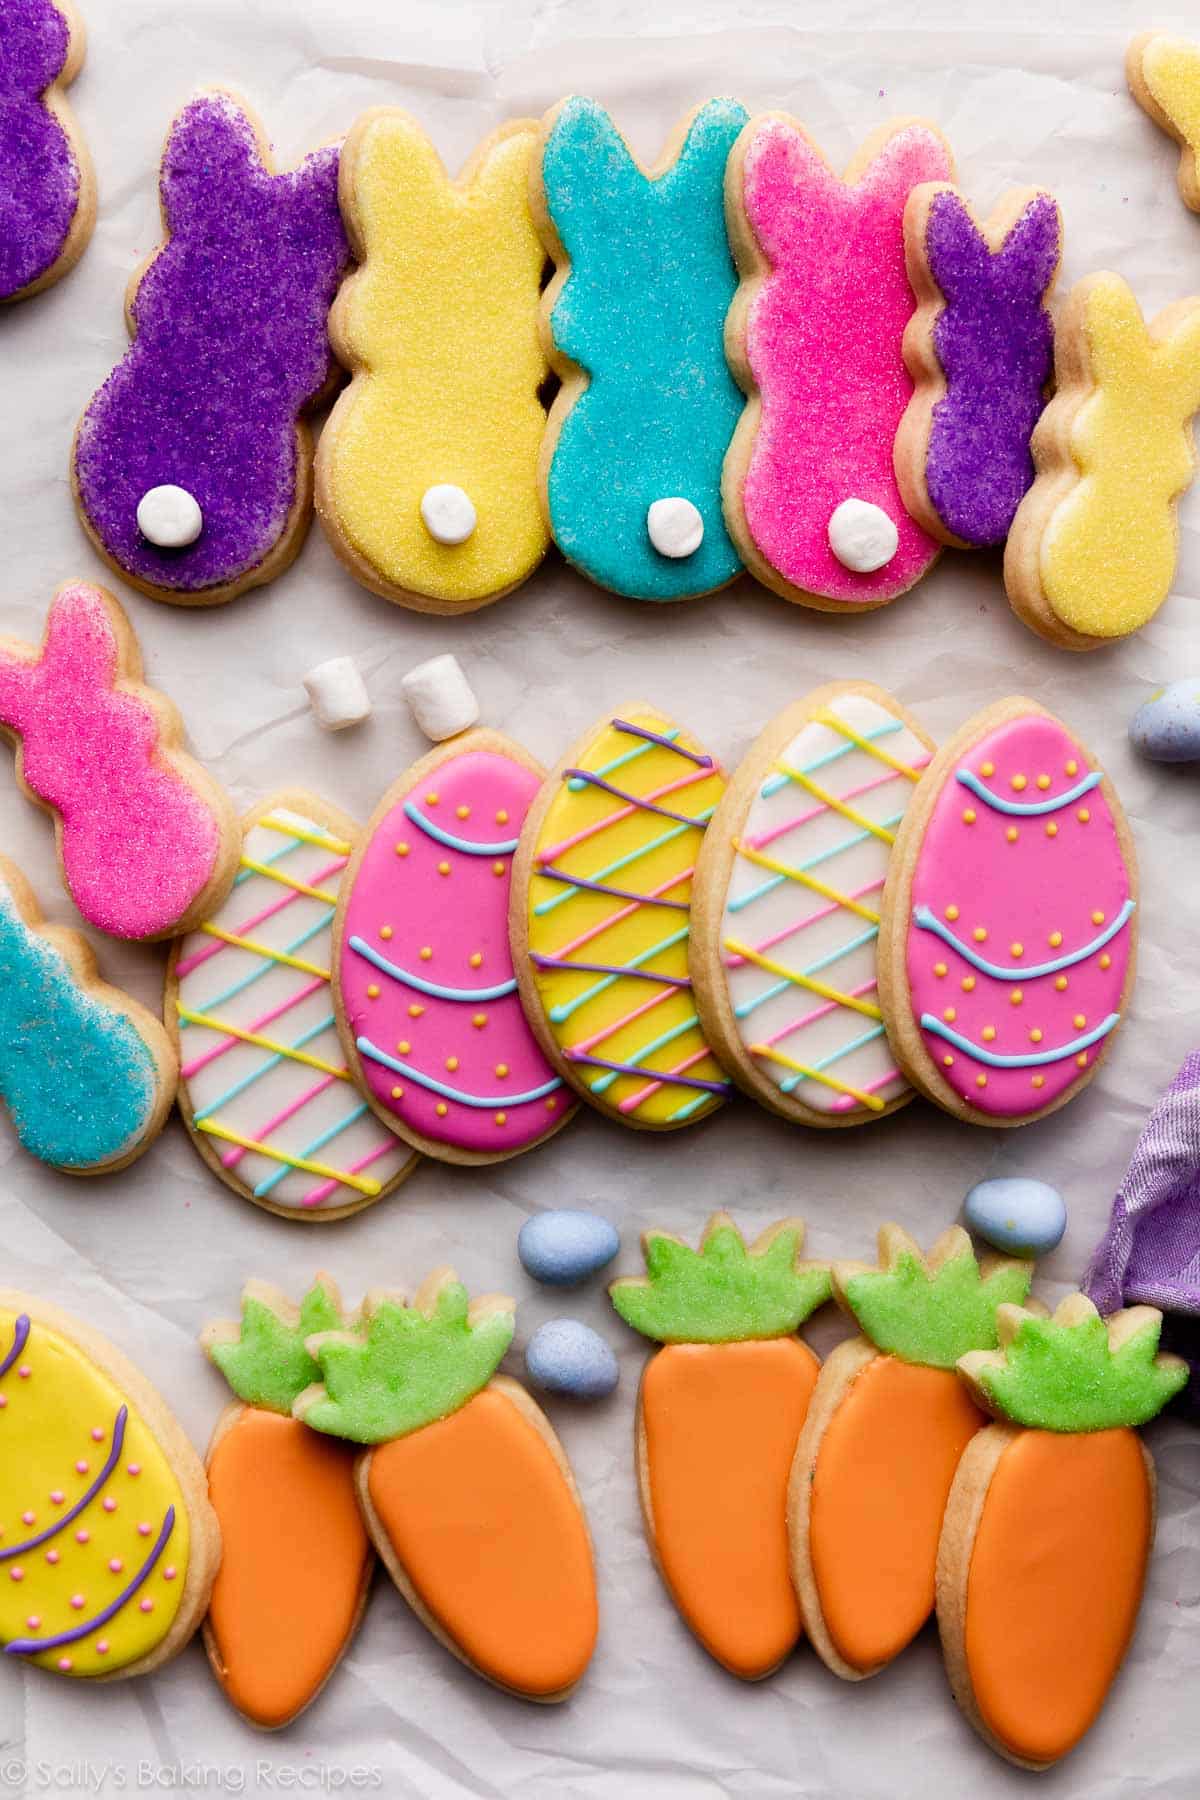 decorated Easter cookies on parchment paper including bunnies with marshmallow tails, Easter eggs, and carrots with orange and green icing.